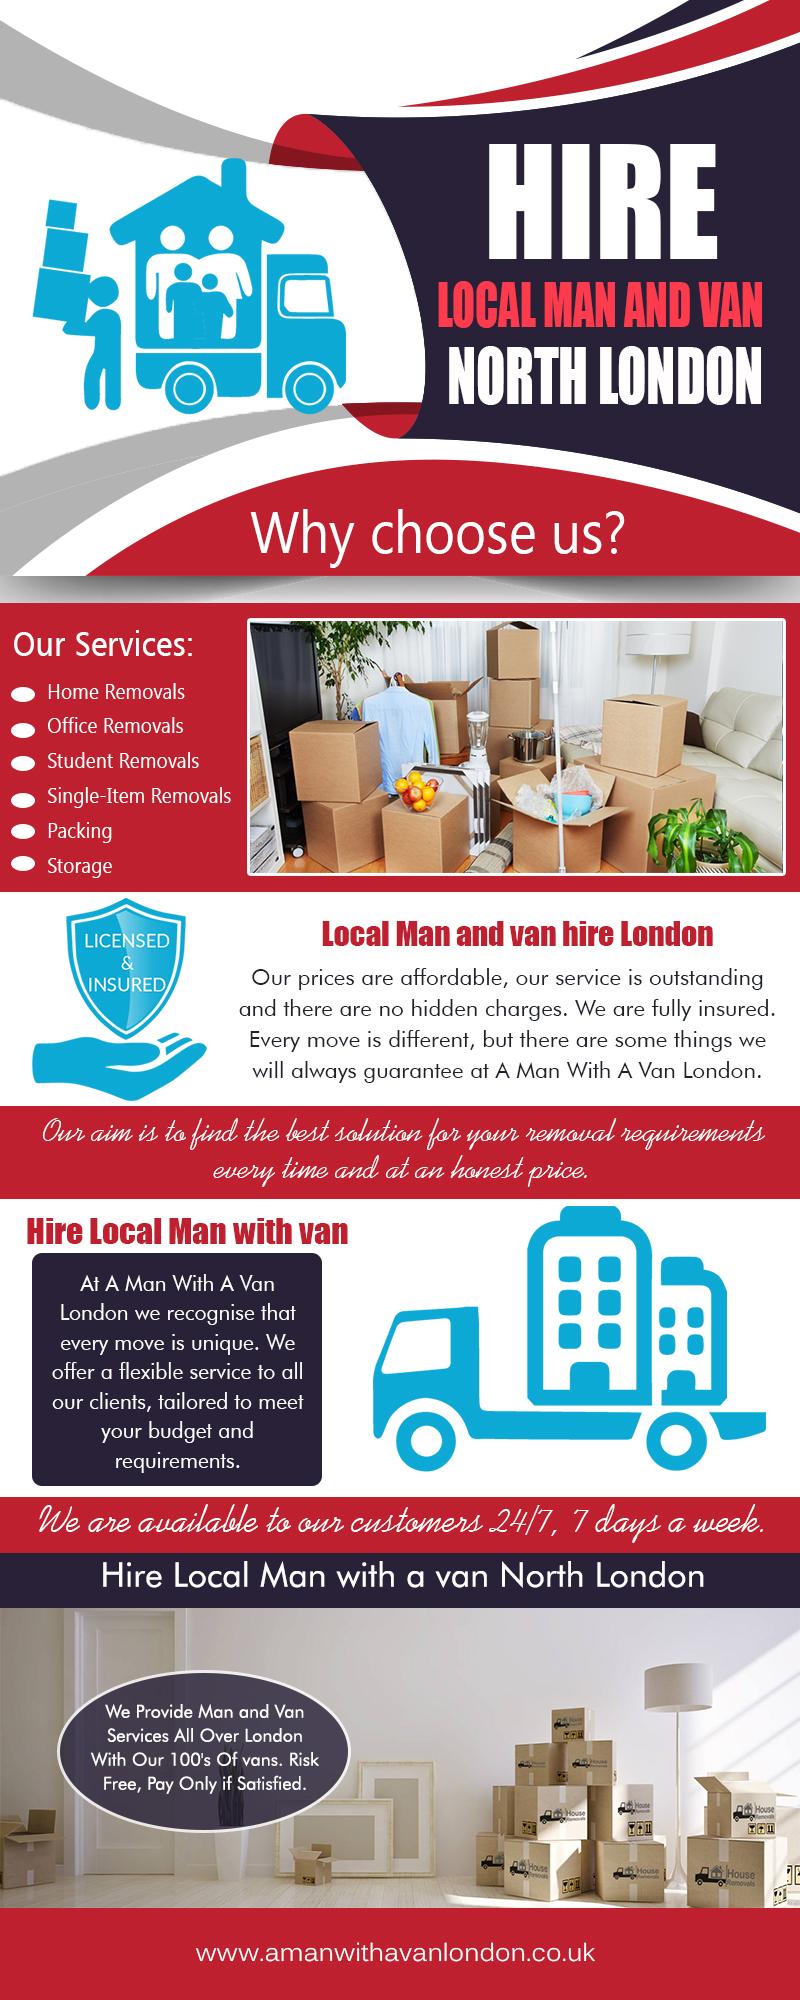 Hire Local Man with van London 